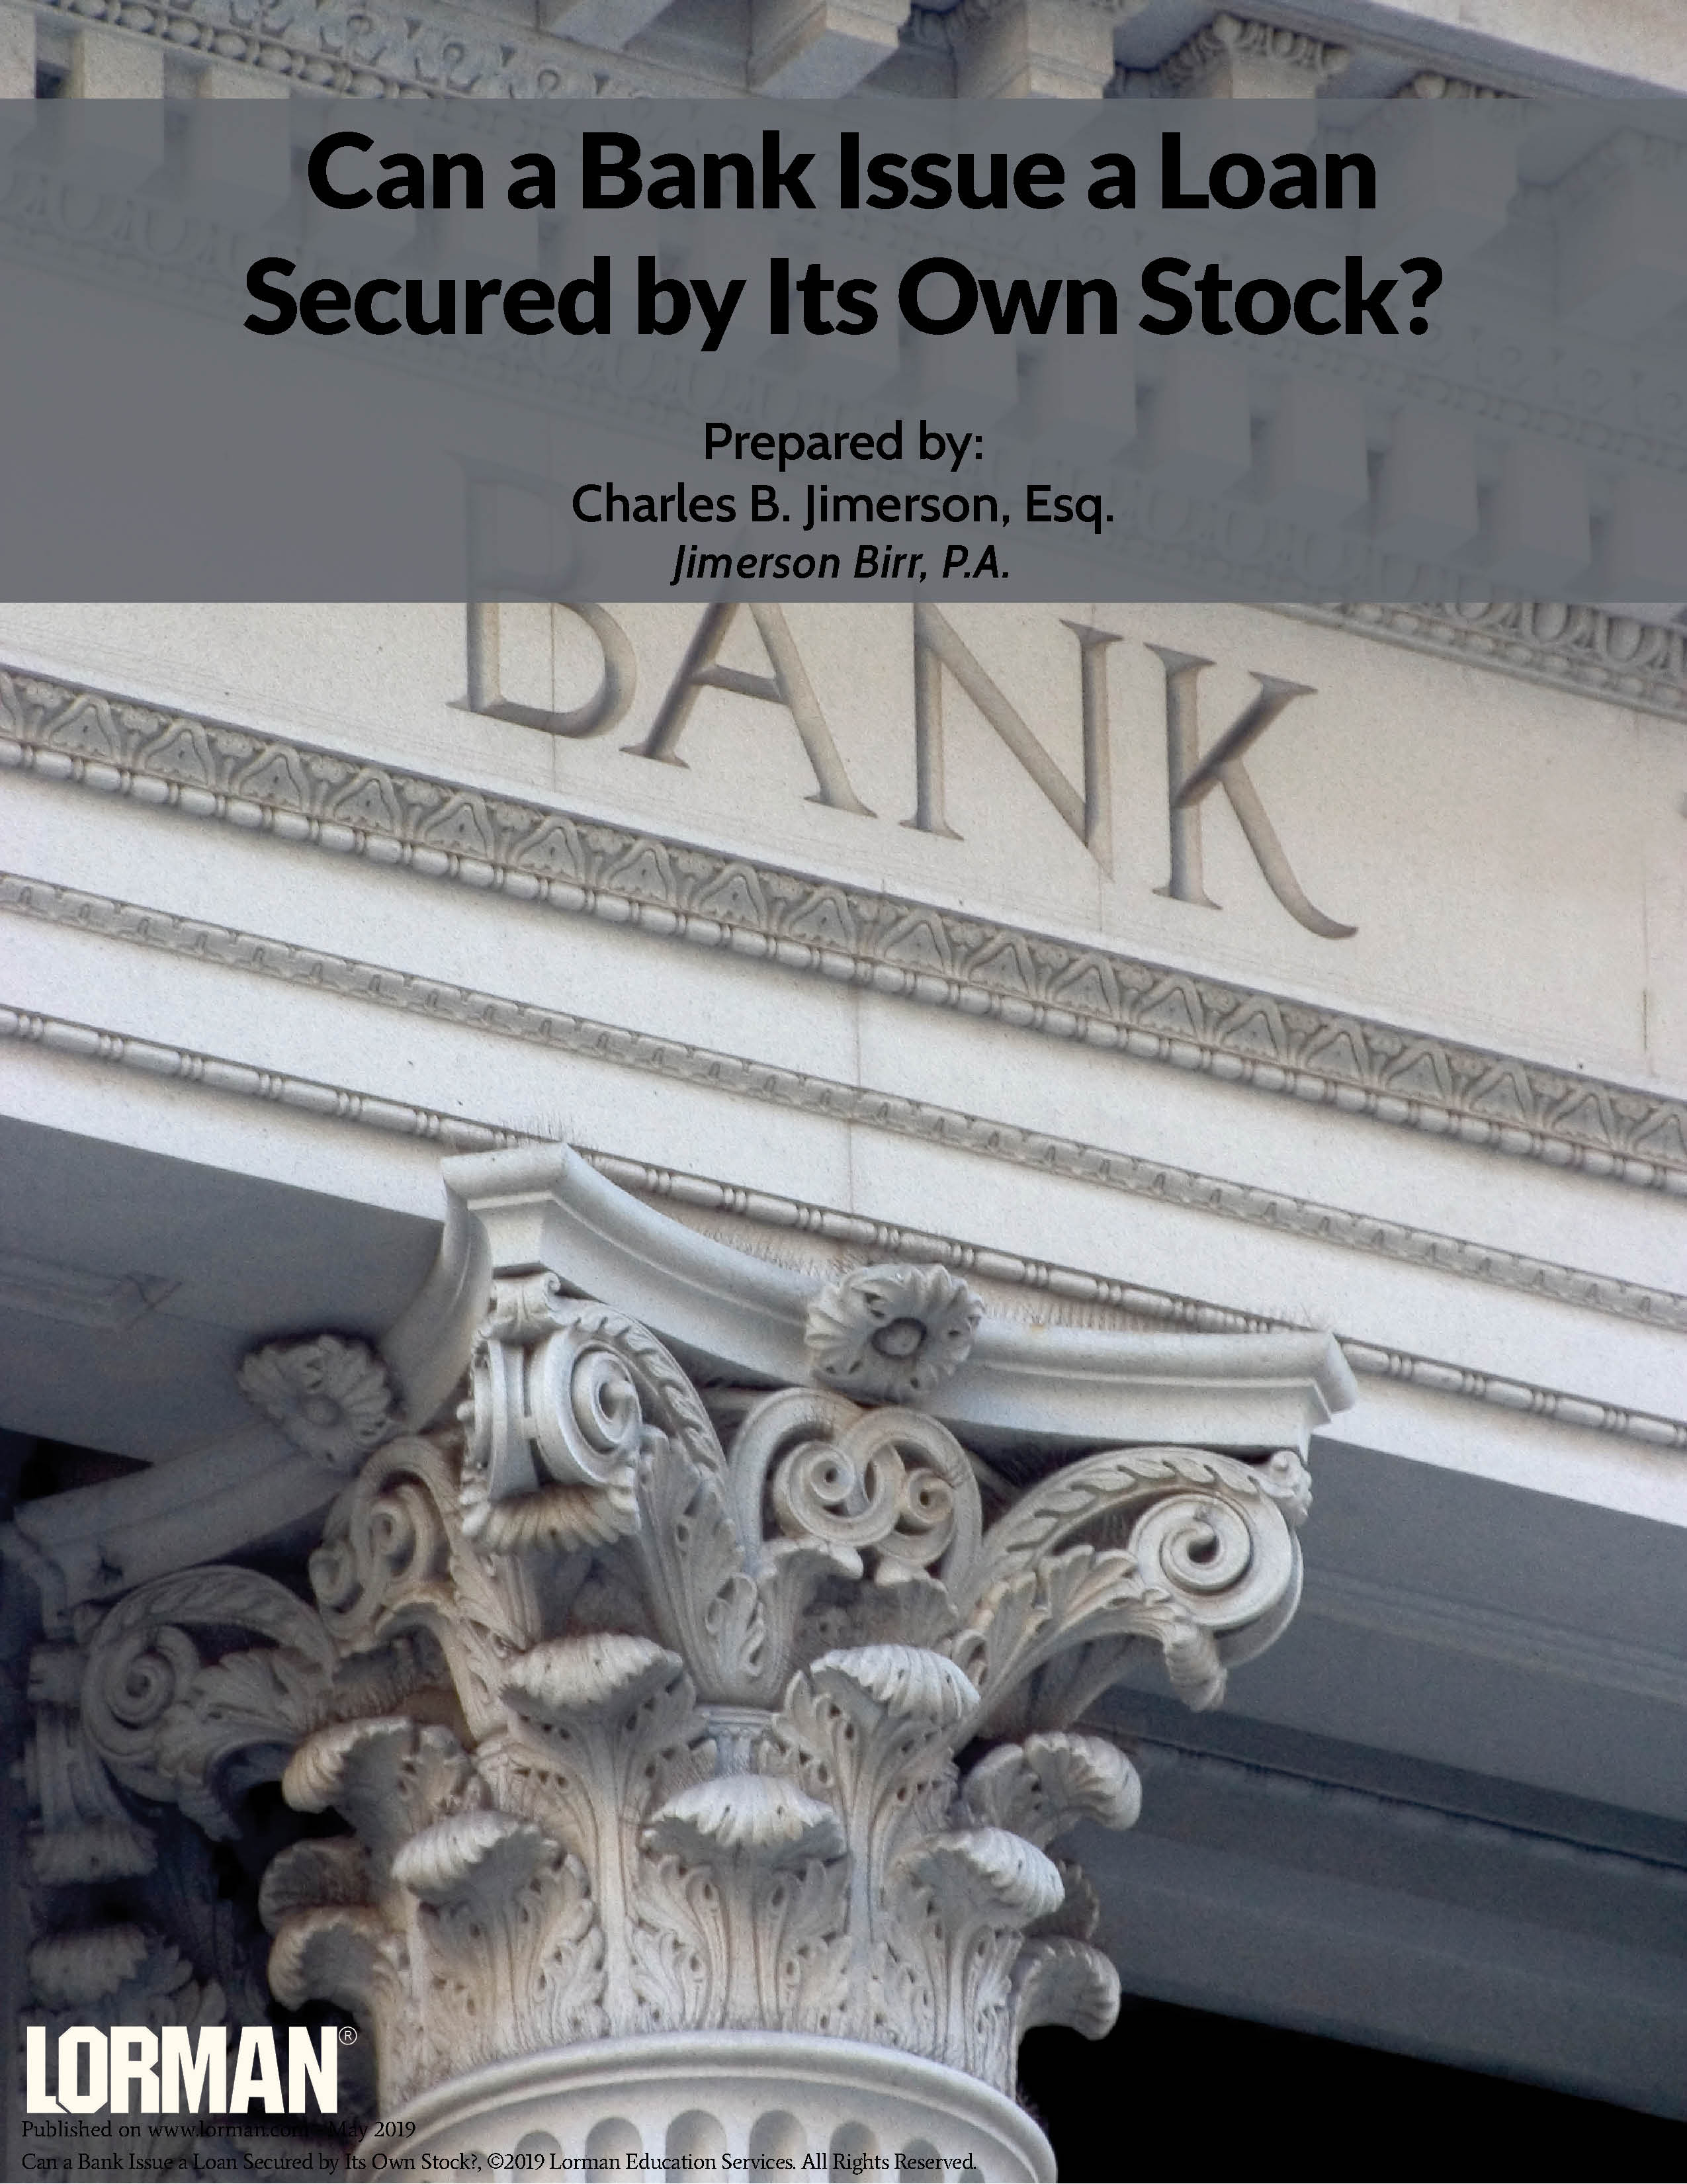 Can a Bank Issue a Loan Secured by Its Own Stock?